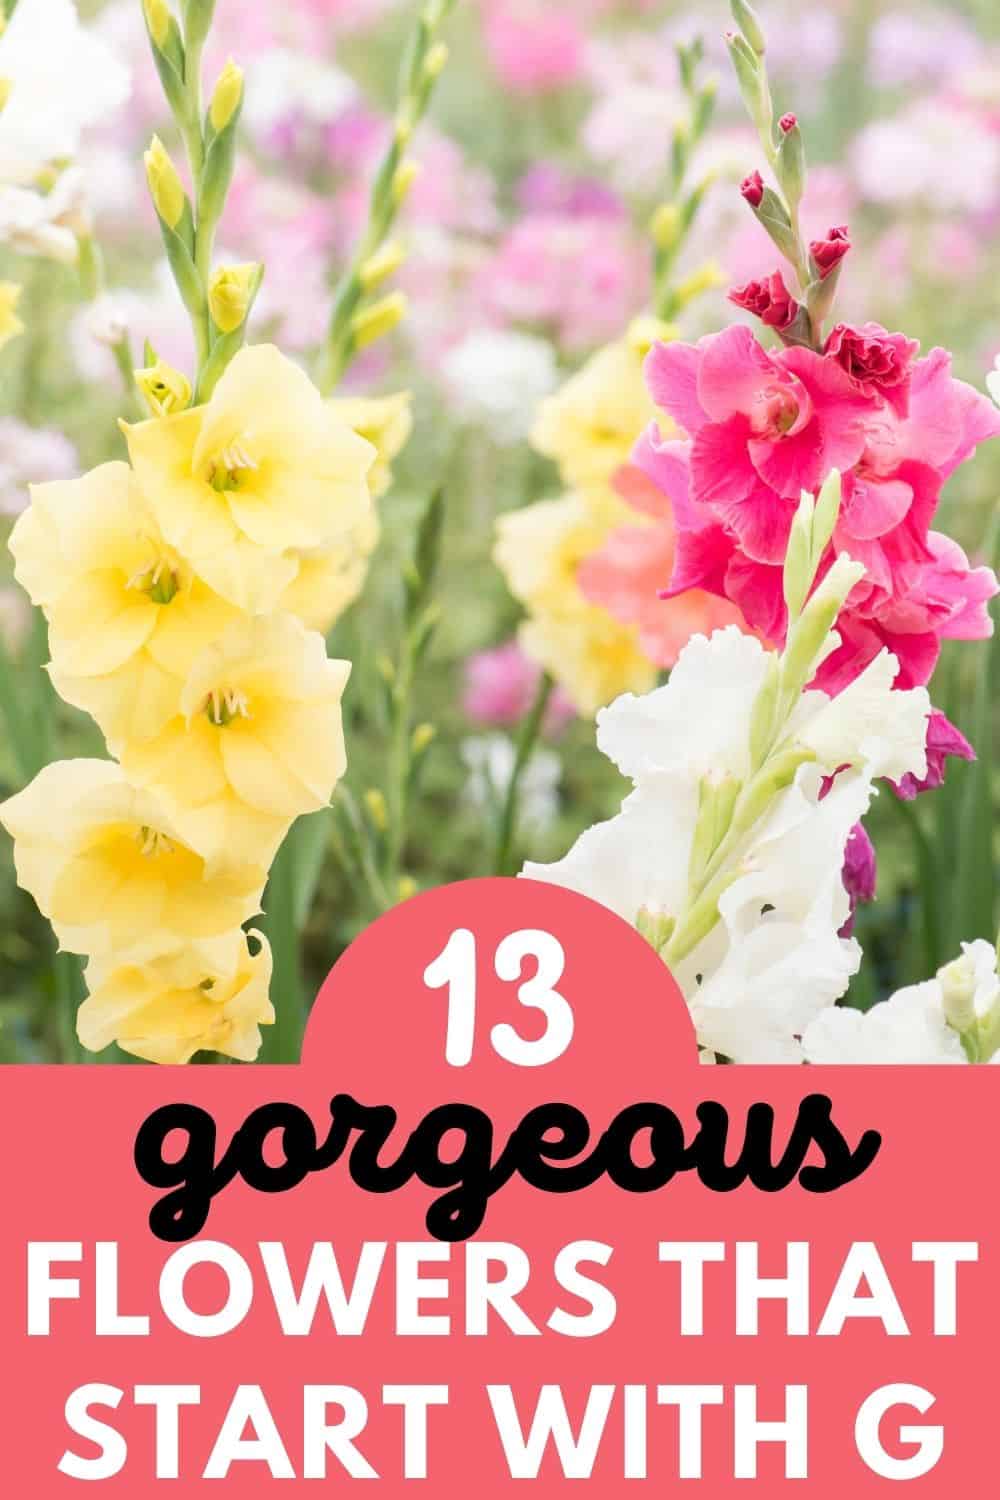 13 flowers that start with G